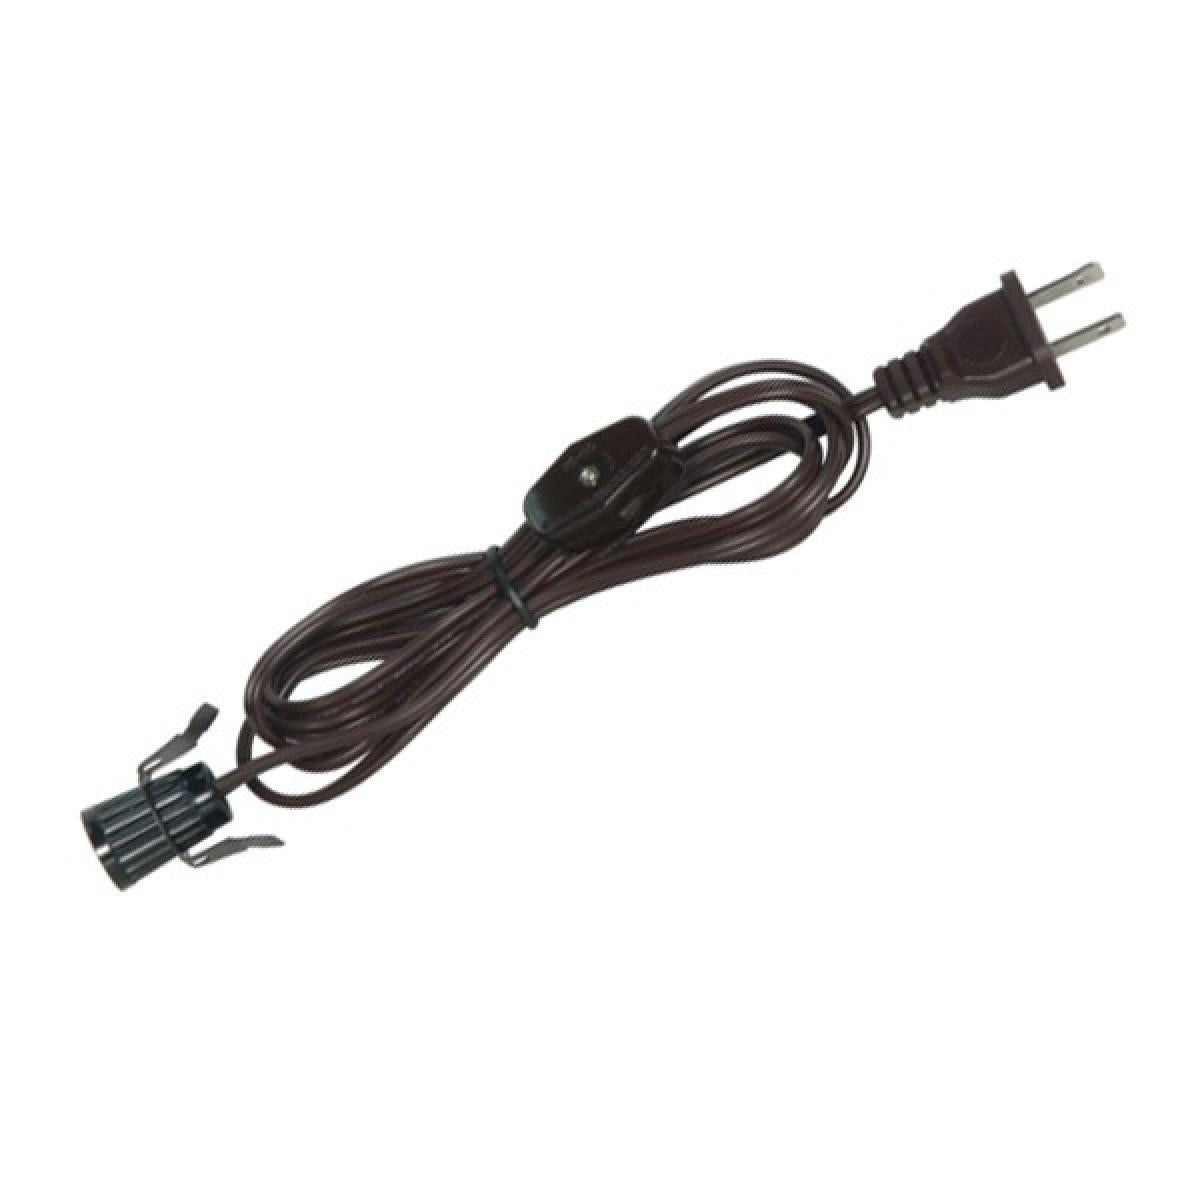 Satco 80-1784 8 Foot #18 SPT-1 Brown Cord, Switch, And Plug (Switch 17" From Socket)